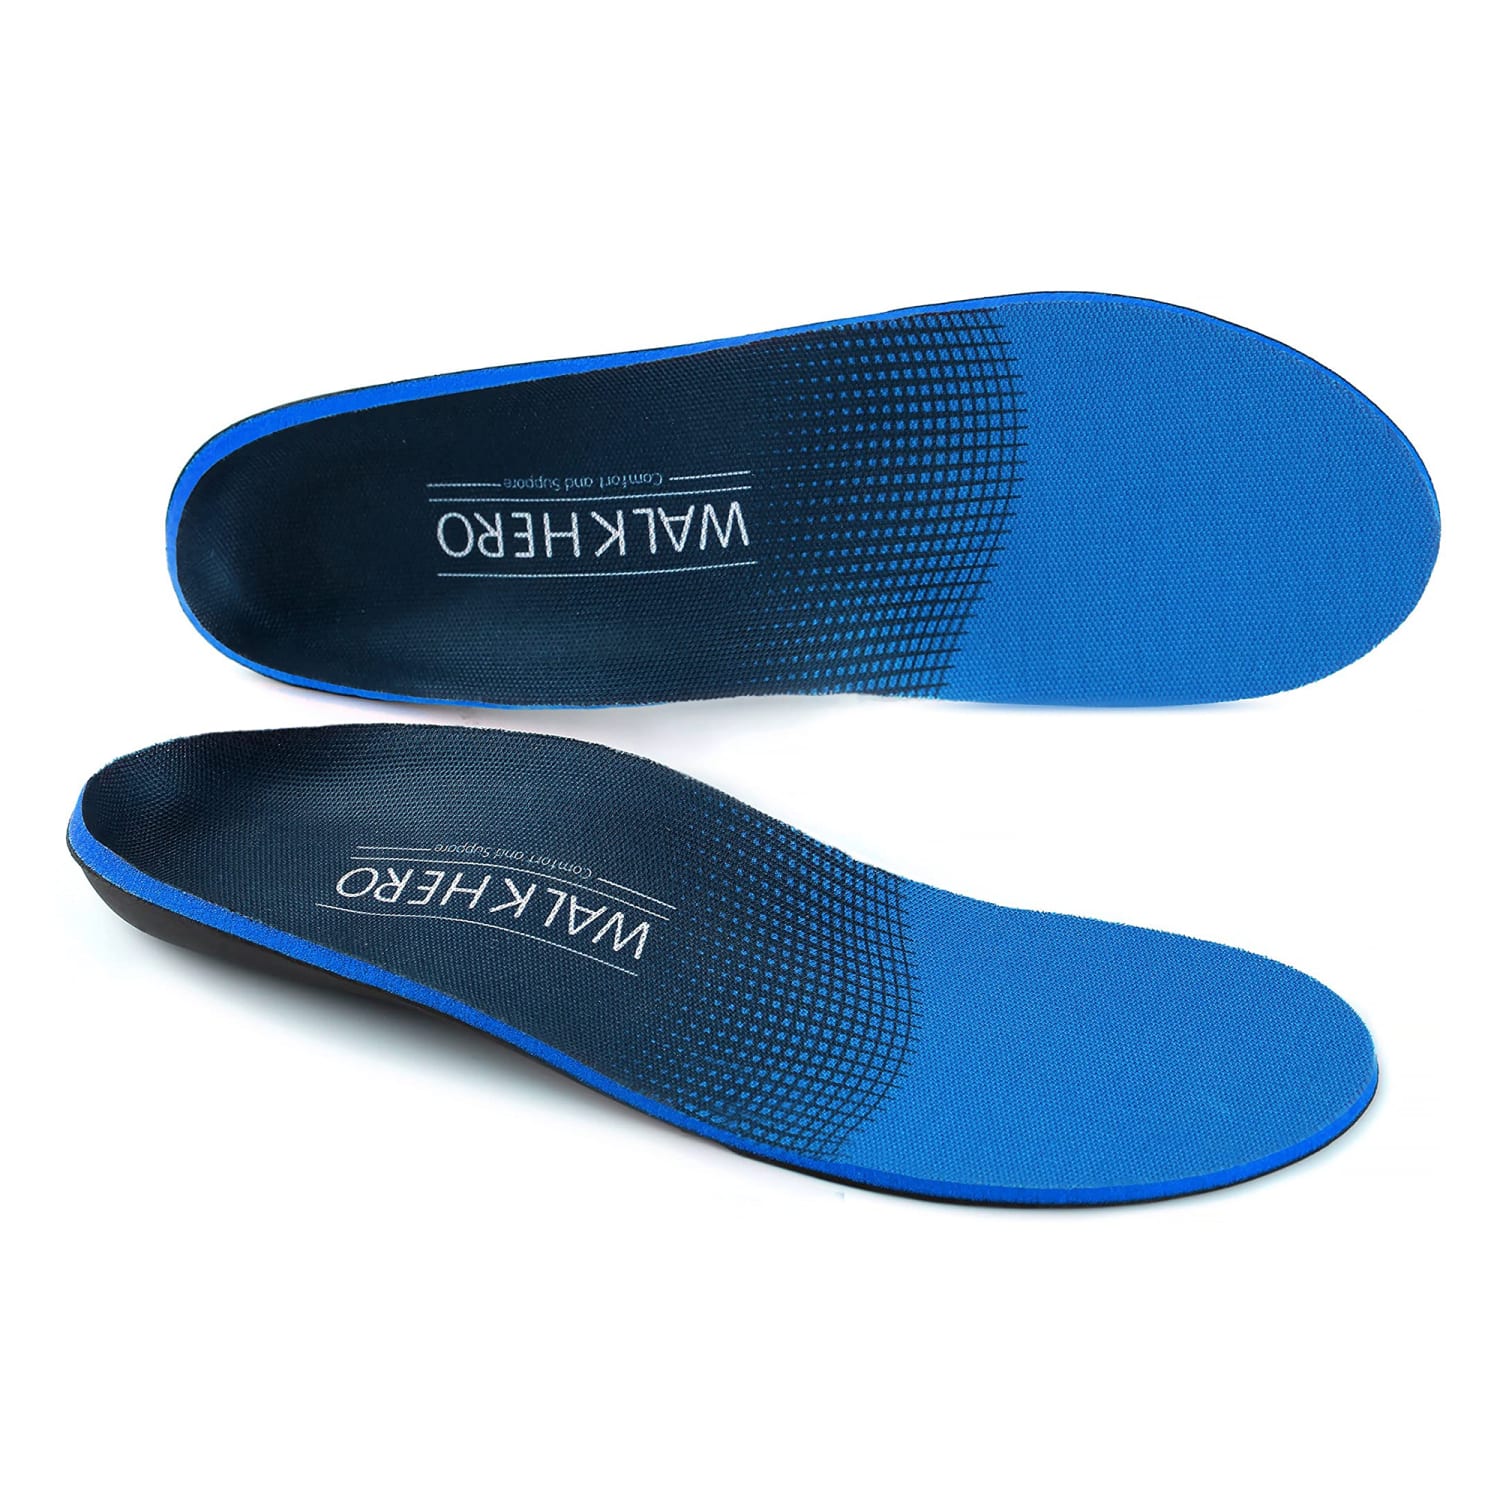 Soft Unisex Orthotic Arch Support Insoles Sport Heel Comfort Shoe Shock Absorb 